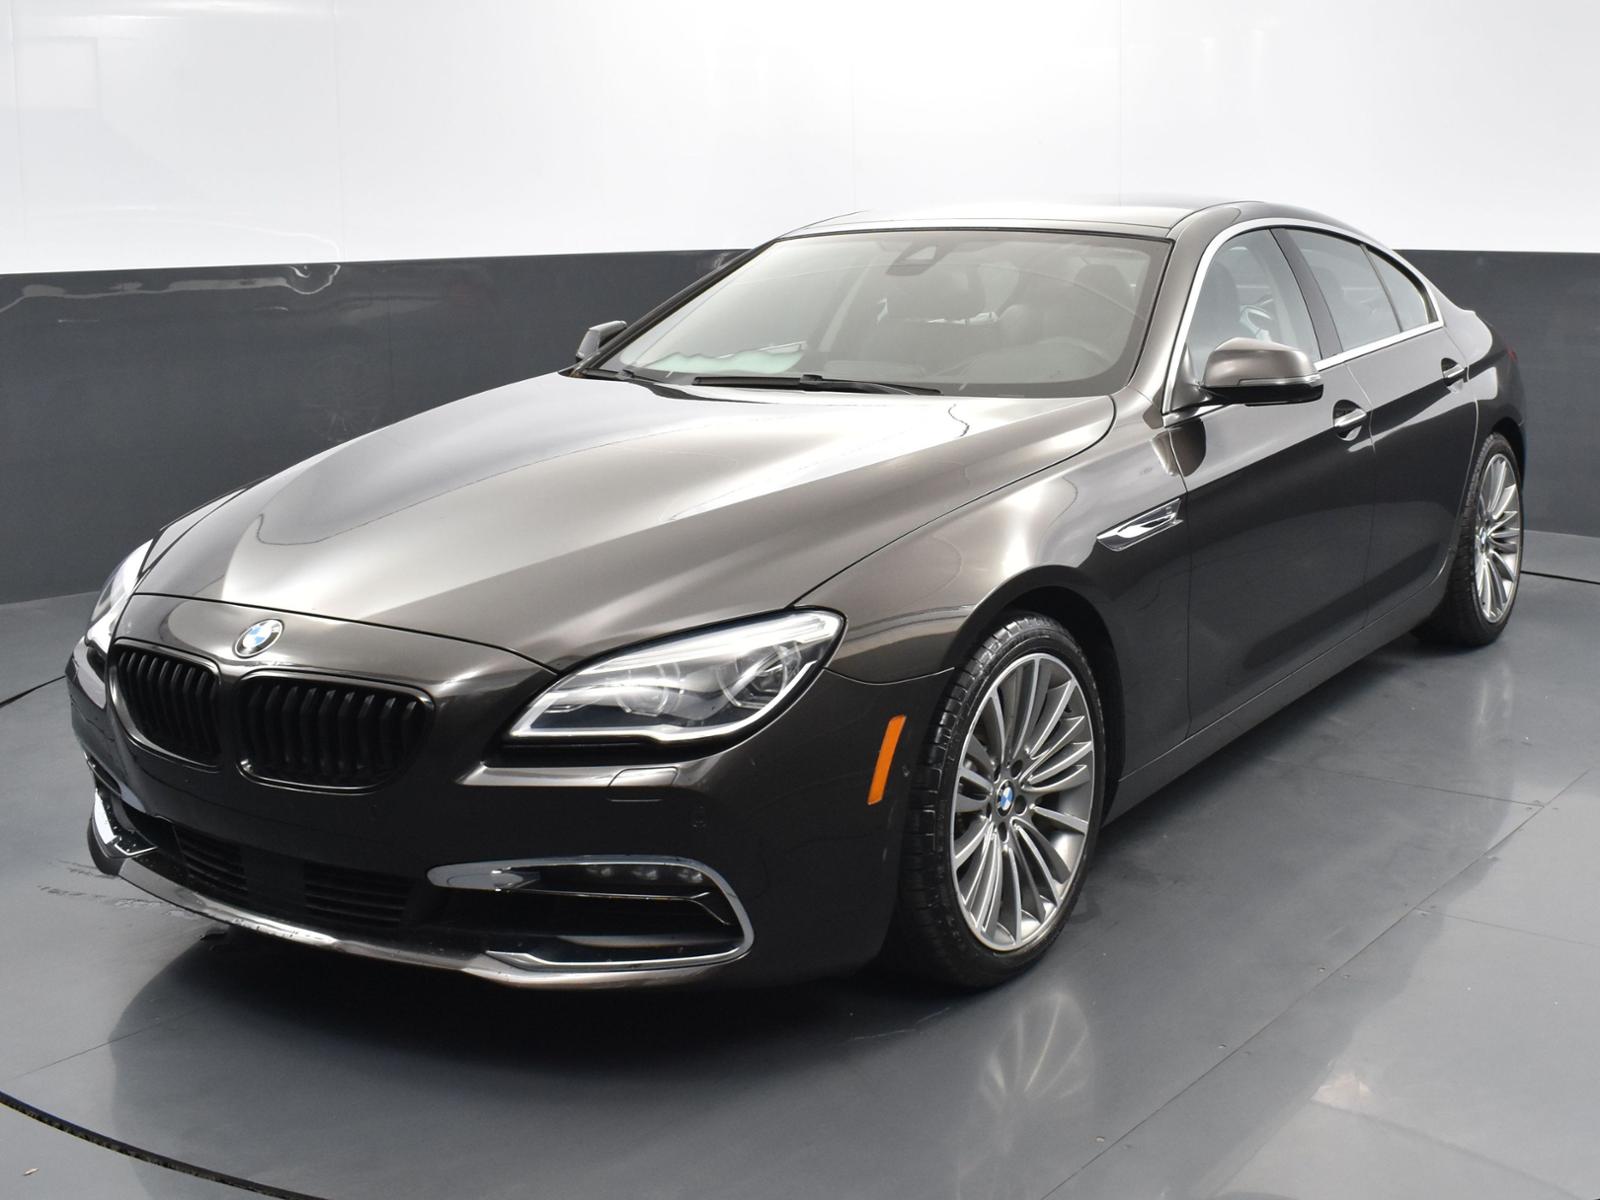 Pre-Owned 2019 BMW 6 Series 650i Gran Coupe 4dr Car in Houston #KGA01121 |  Sterling McCall Hyundai